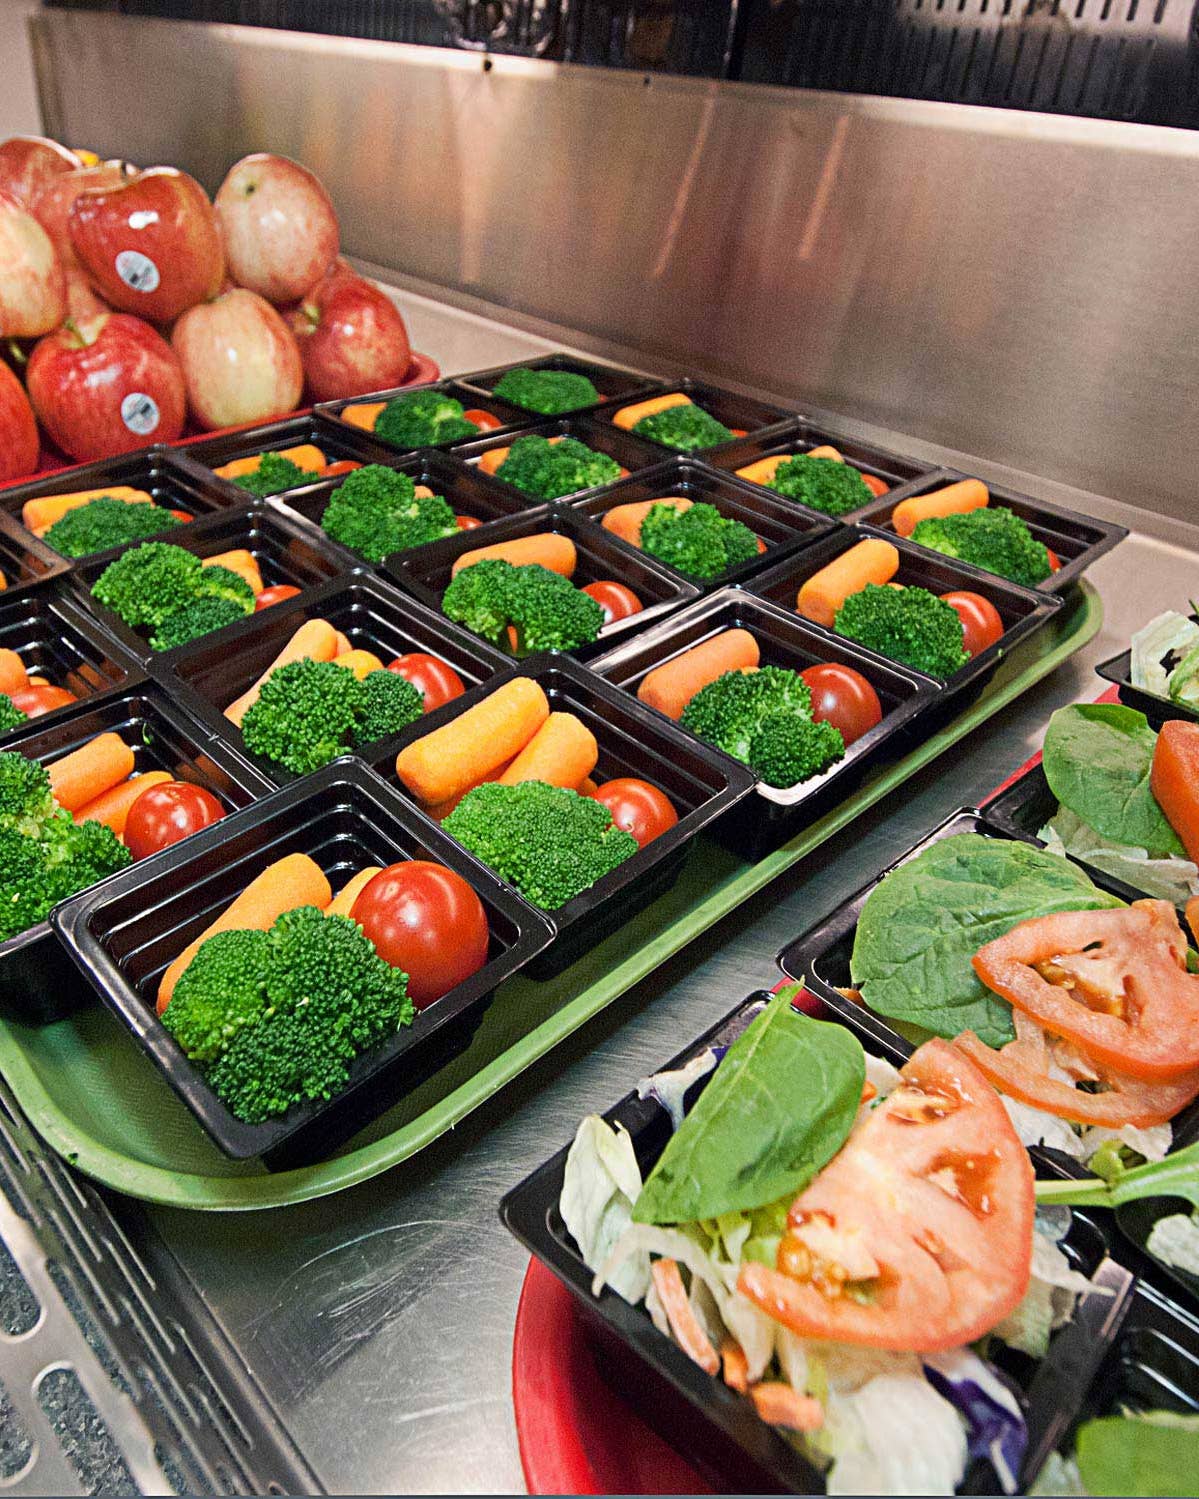 How Four South Carolina School Districts Are Shaking Up School Lunch